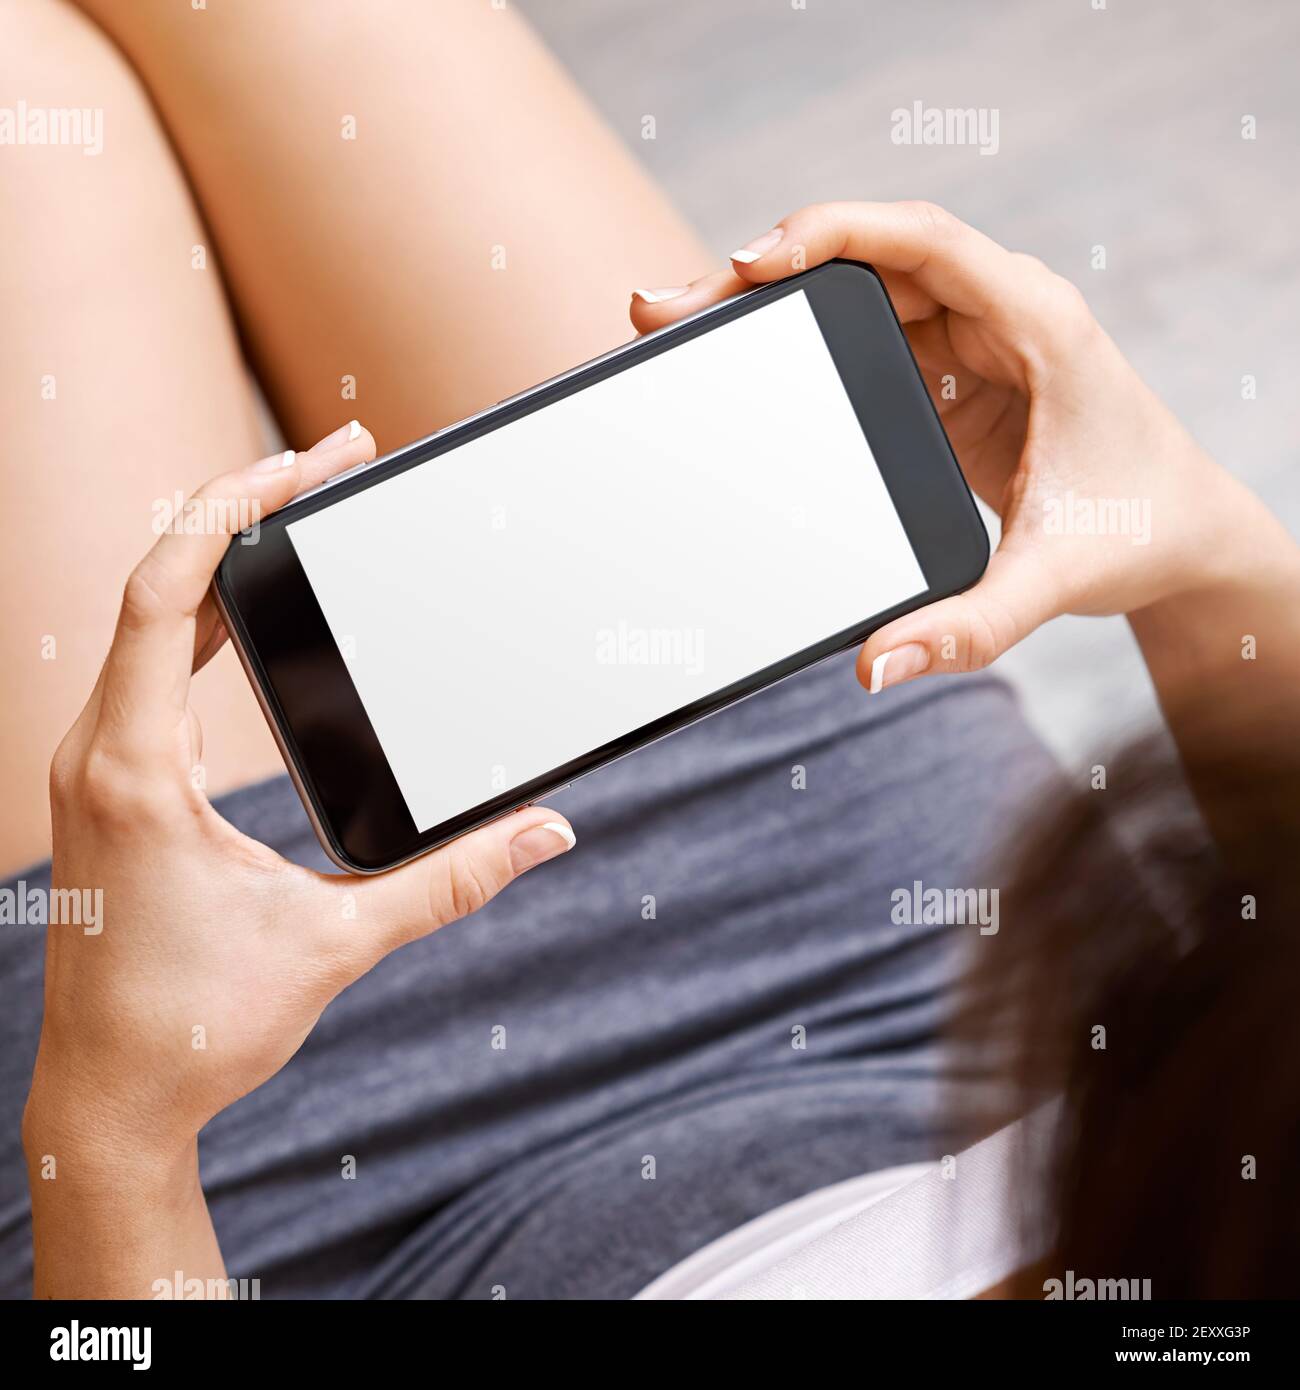 Woman hold black phablet device Stock Photo